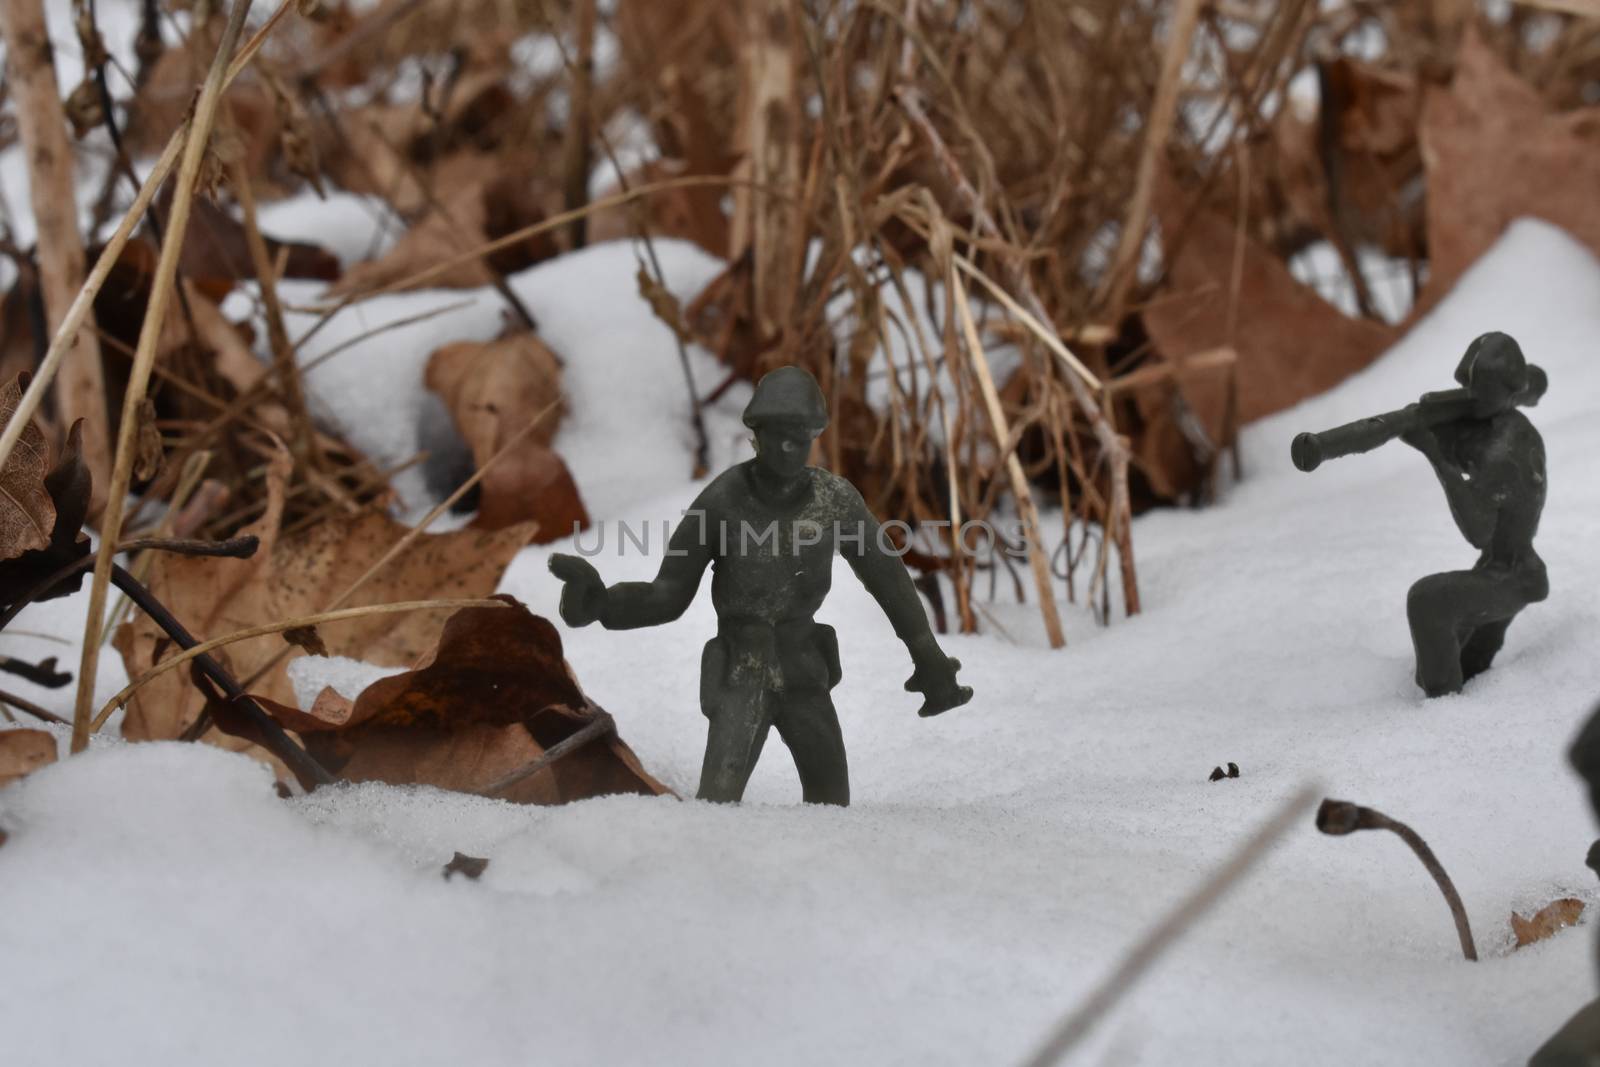 A Toy Soldier Holding a Pistol in a Snowy Field by bju12290